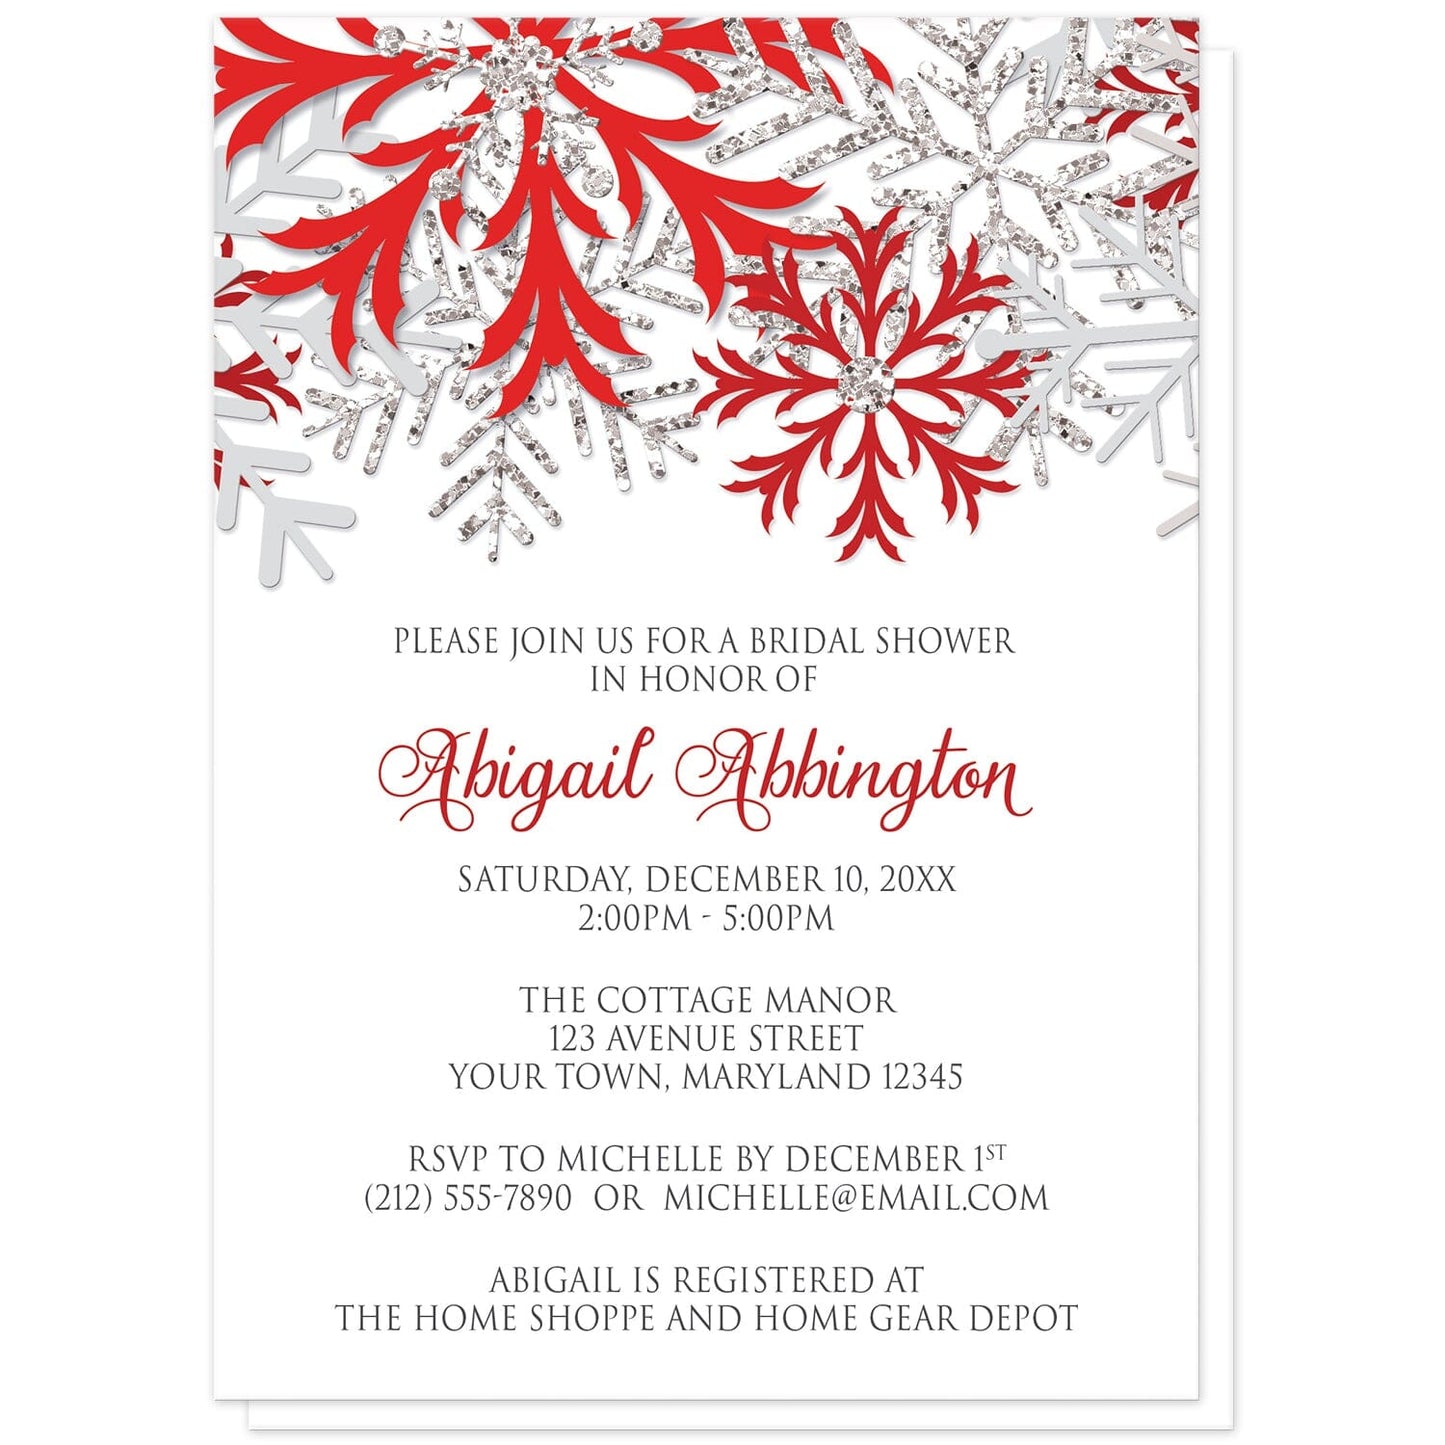 Winter Red Silver Snowflake Bridal Shower Invitations at Artistically Invited. Beautiful winter red silver snowflake bridal shower invitations designed with red, dark red, silver-colored glitter-illustrated, and light gray snowflakes along the top over a white background. Your personalized bridal shower celebration details are custom printed in red and gray below the pretty snowflakes.